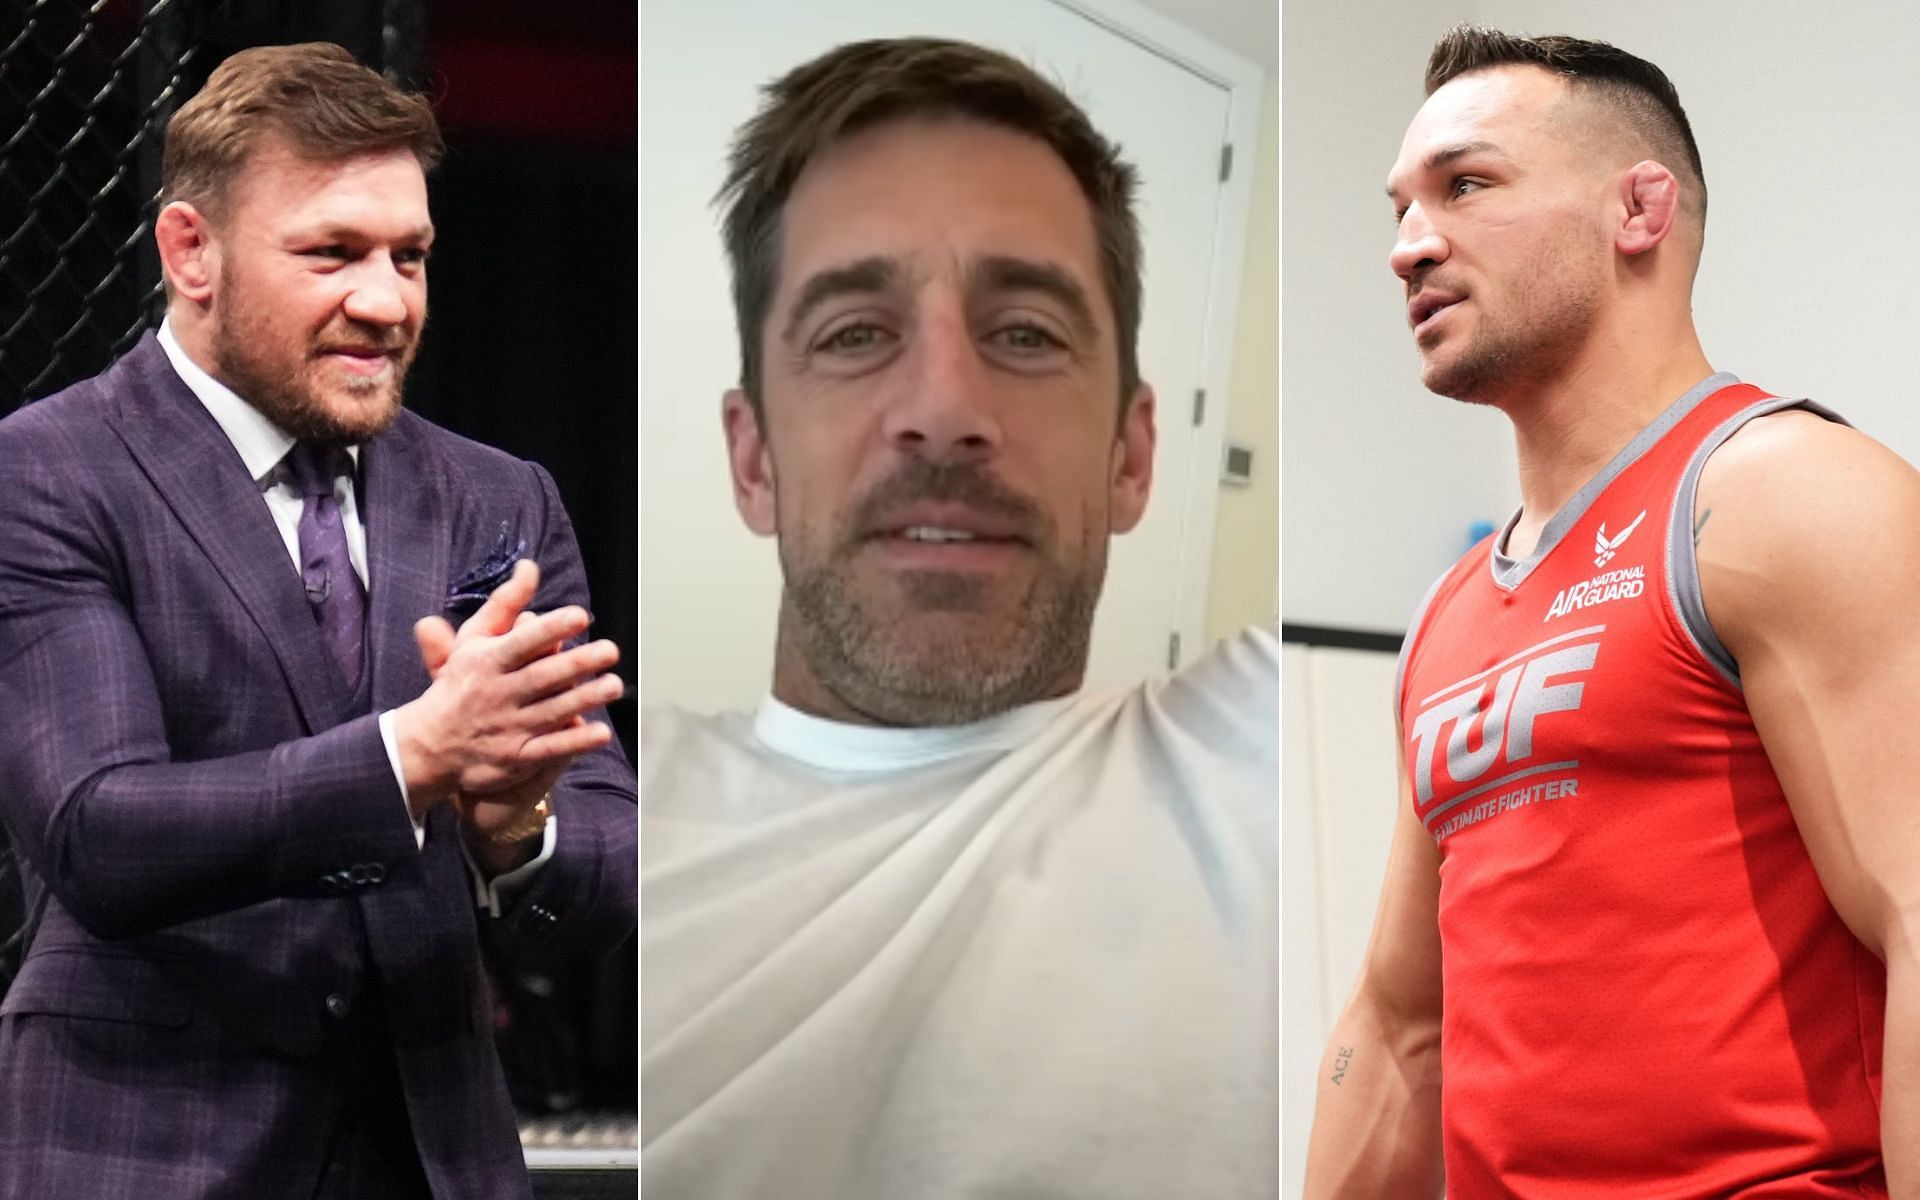 Conor McGregor [Left], Aaron Rodgers [Middle], and Michael Chandler [Right] [Photo credit: @UltimateFighter - X, and The Pat McAfee Show - YouTube]